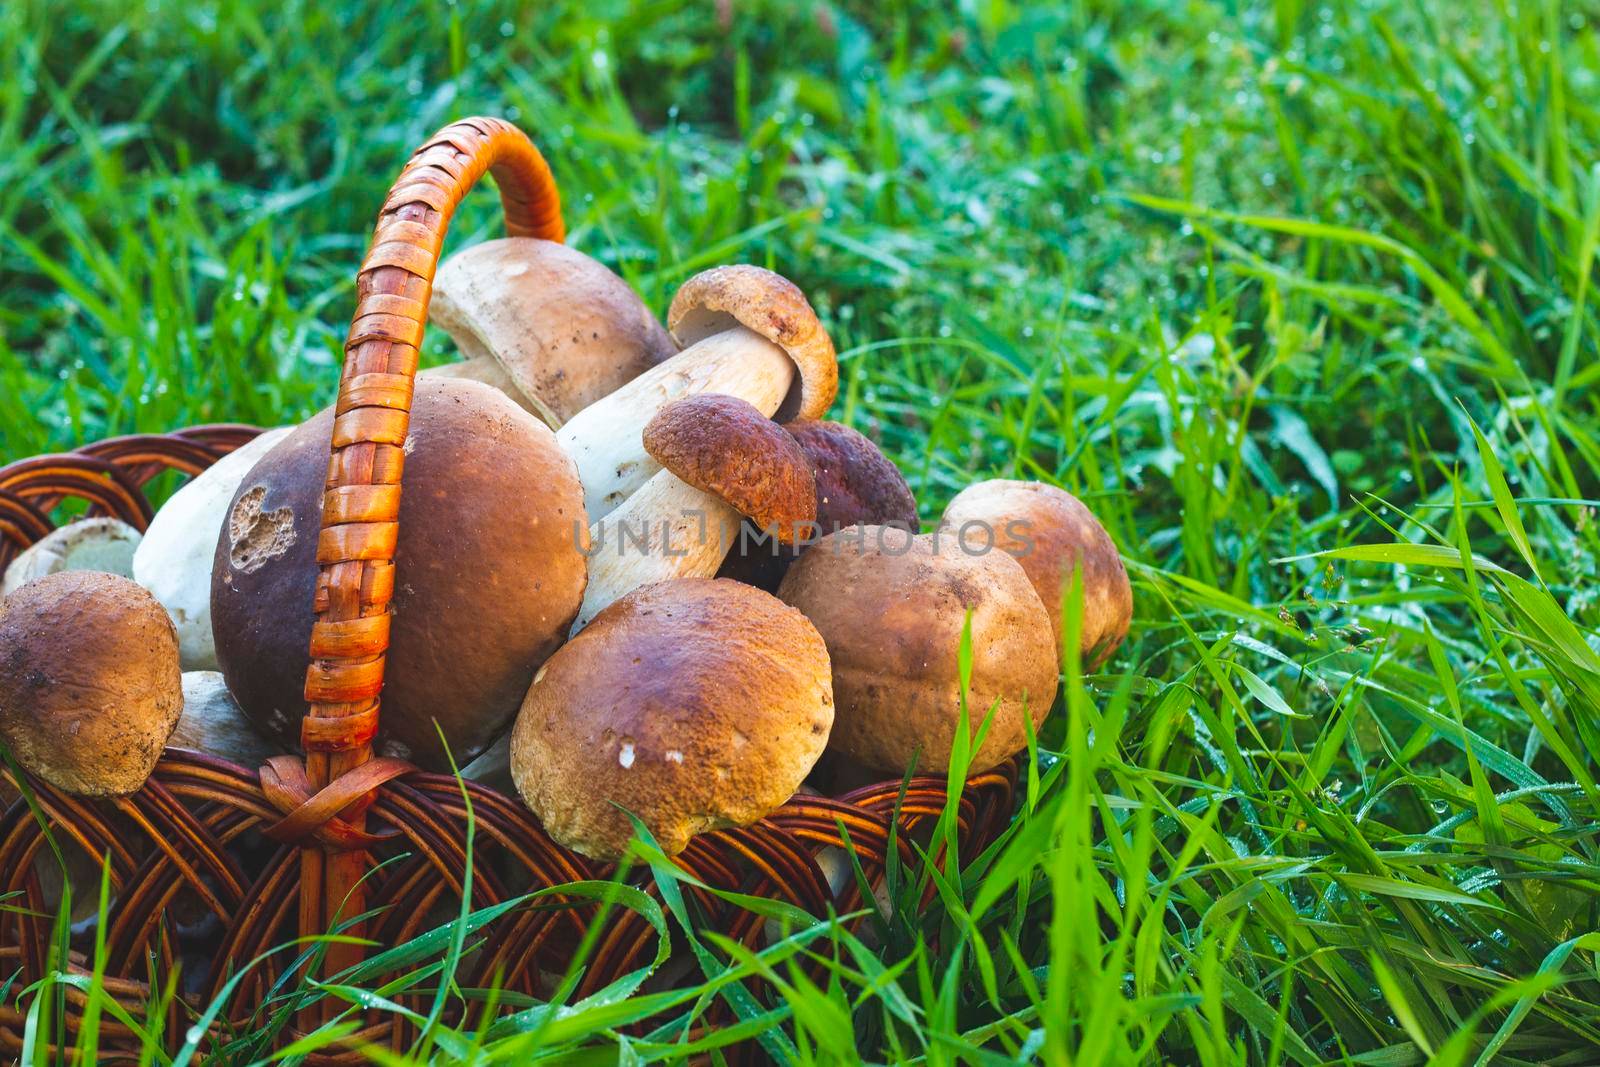 Basket with porcini mushrooms in grass. Pick up boletus cep mushroom in wild wood. Forest natural food